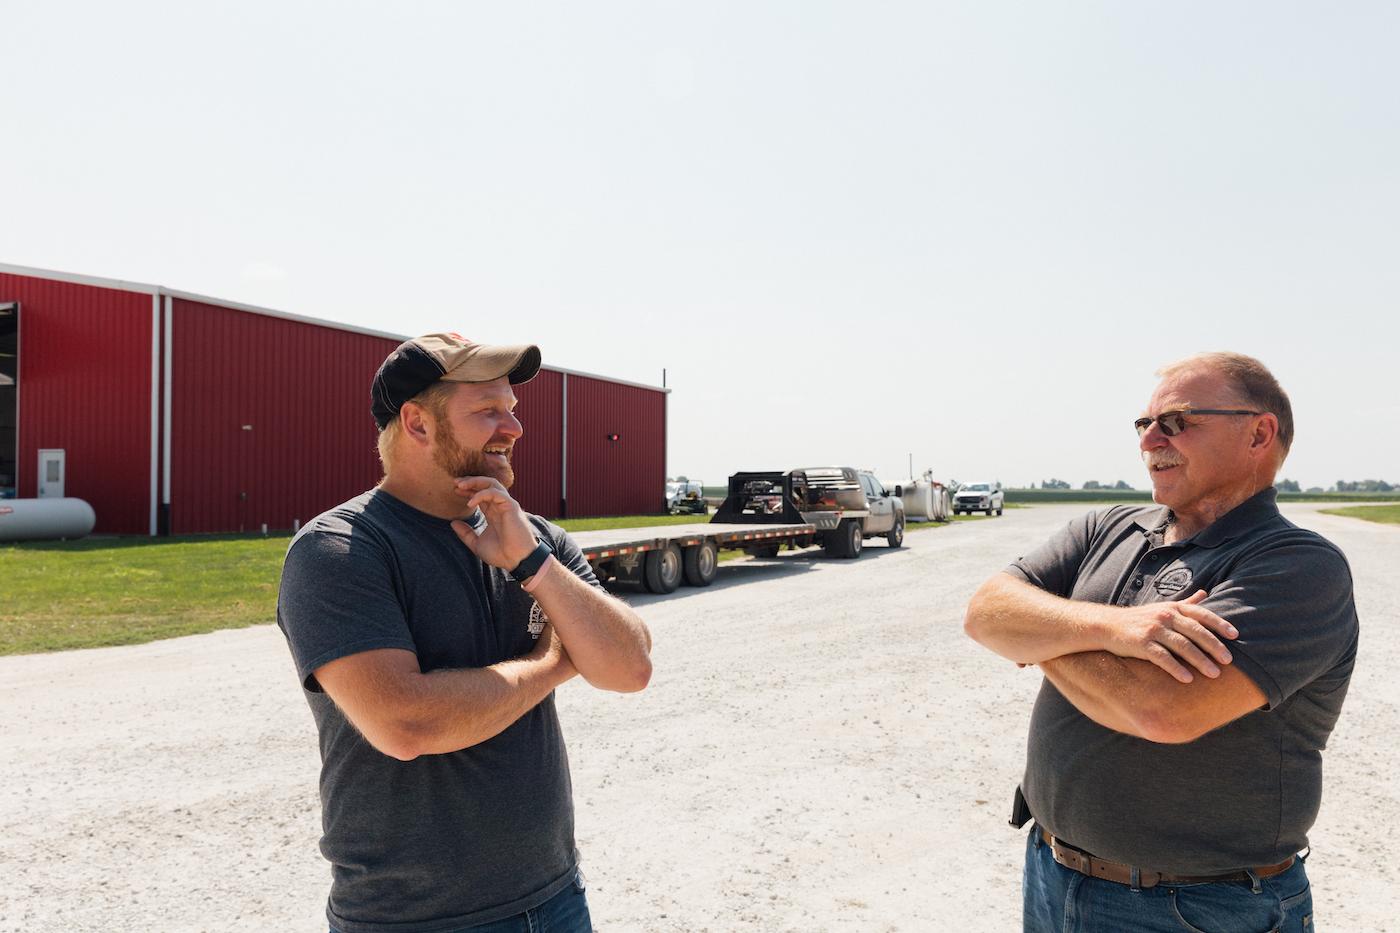 Ross and Harold Wilken laugh and talk with their arms crossed on their farm